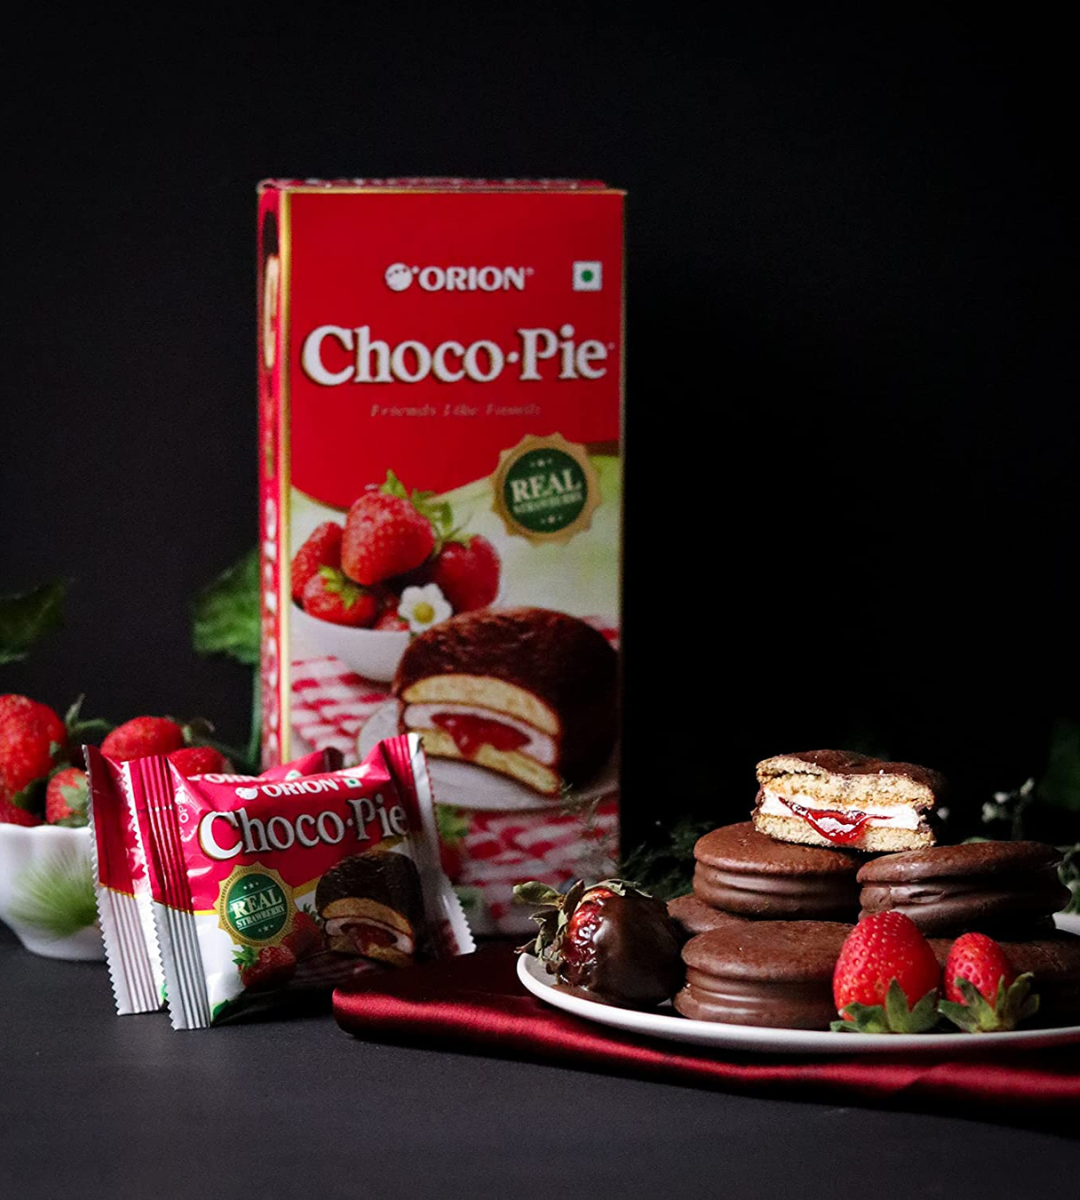 ORION Strawberry Choco Pie - 2 x 12 Piece Pack (24 pies)| Centre-filled Chocolate biscuit